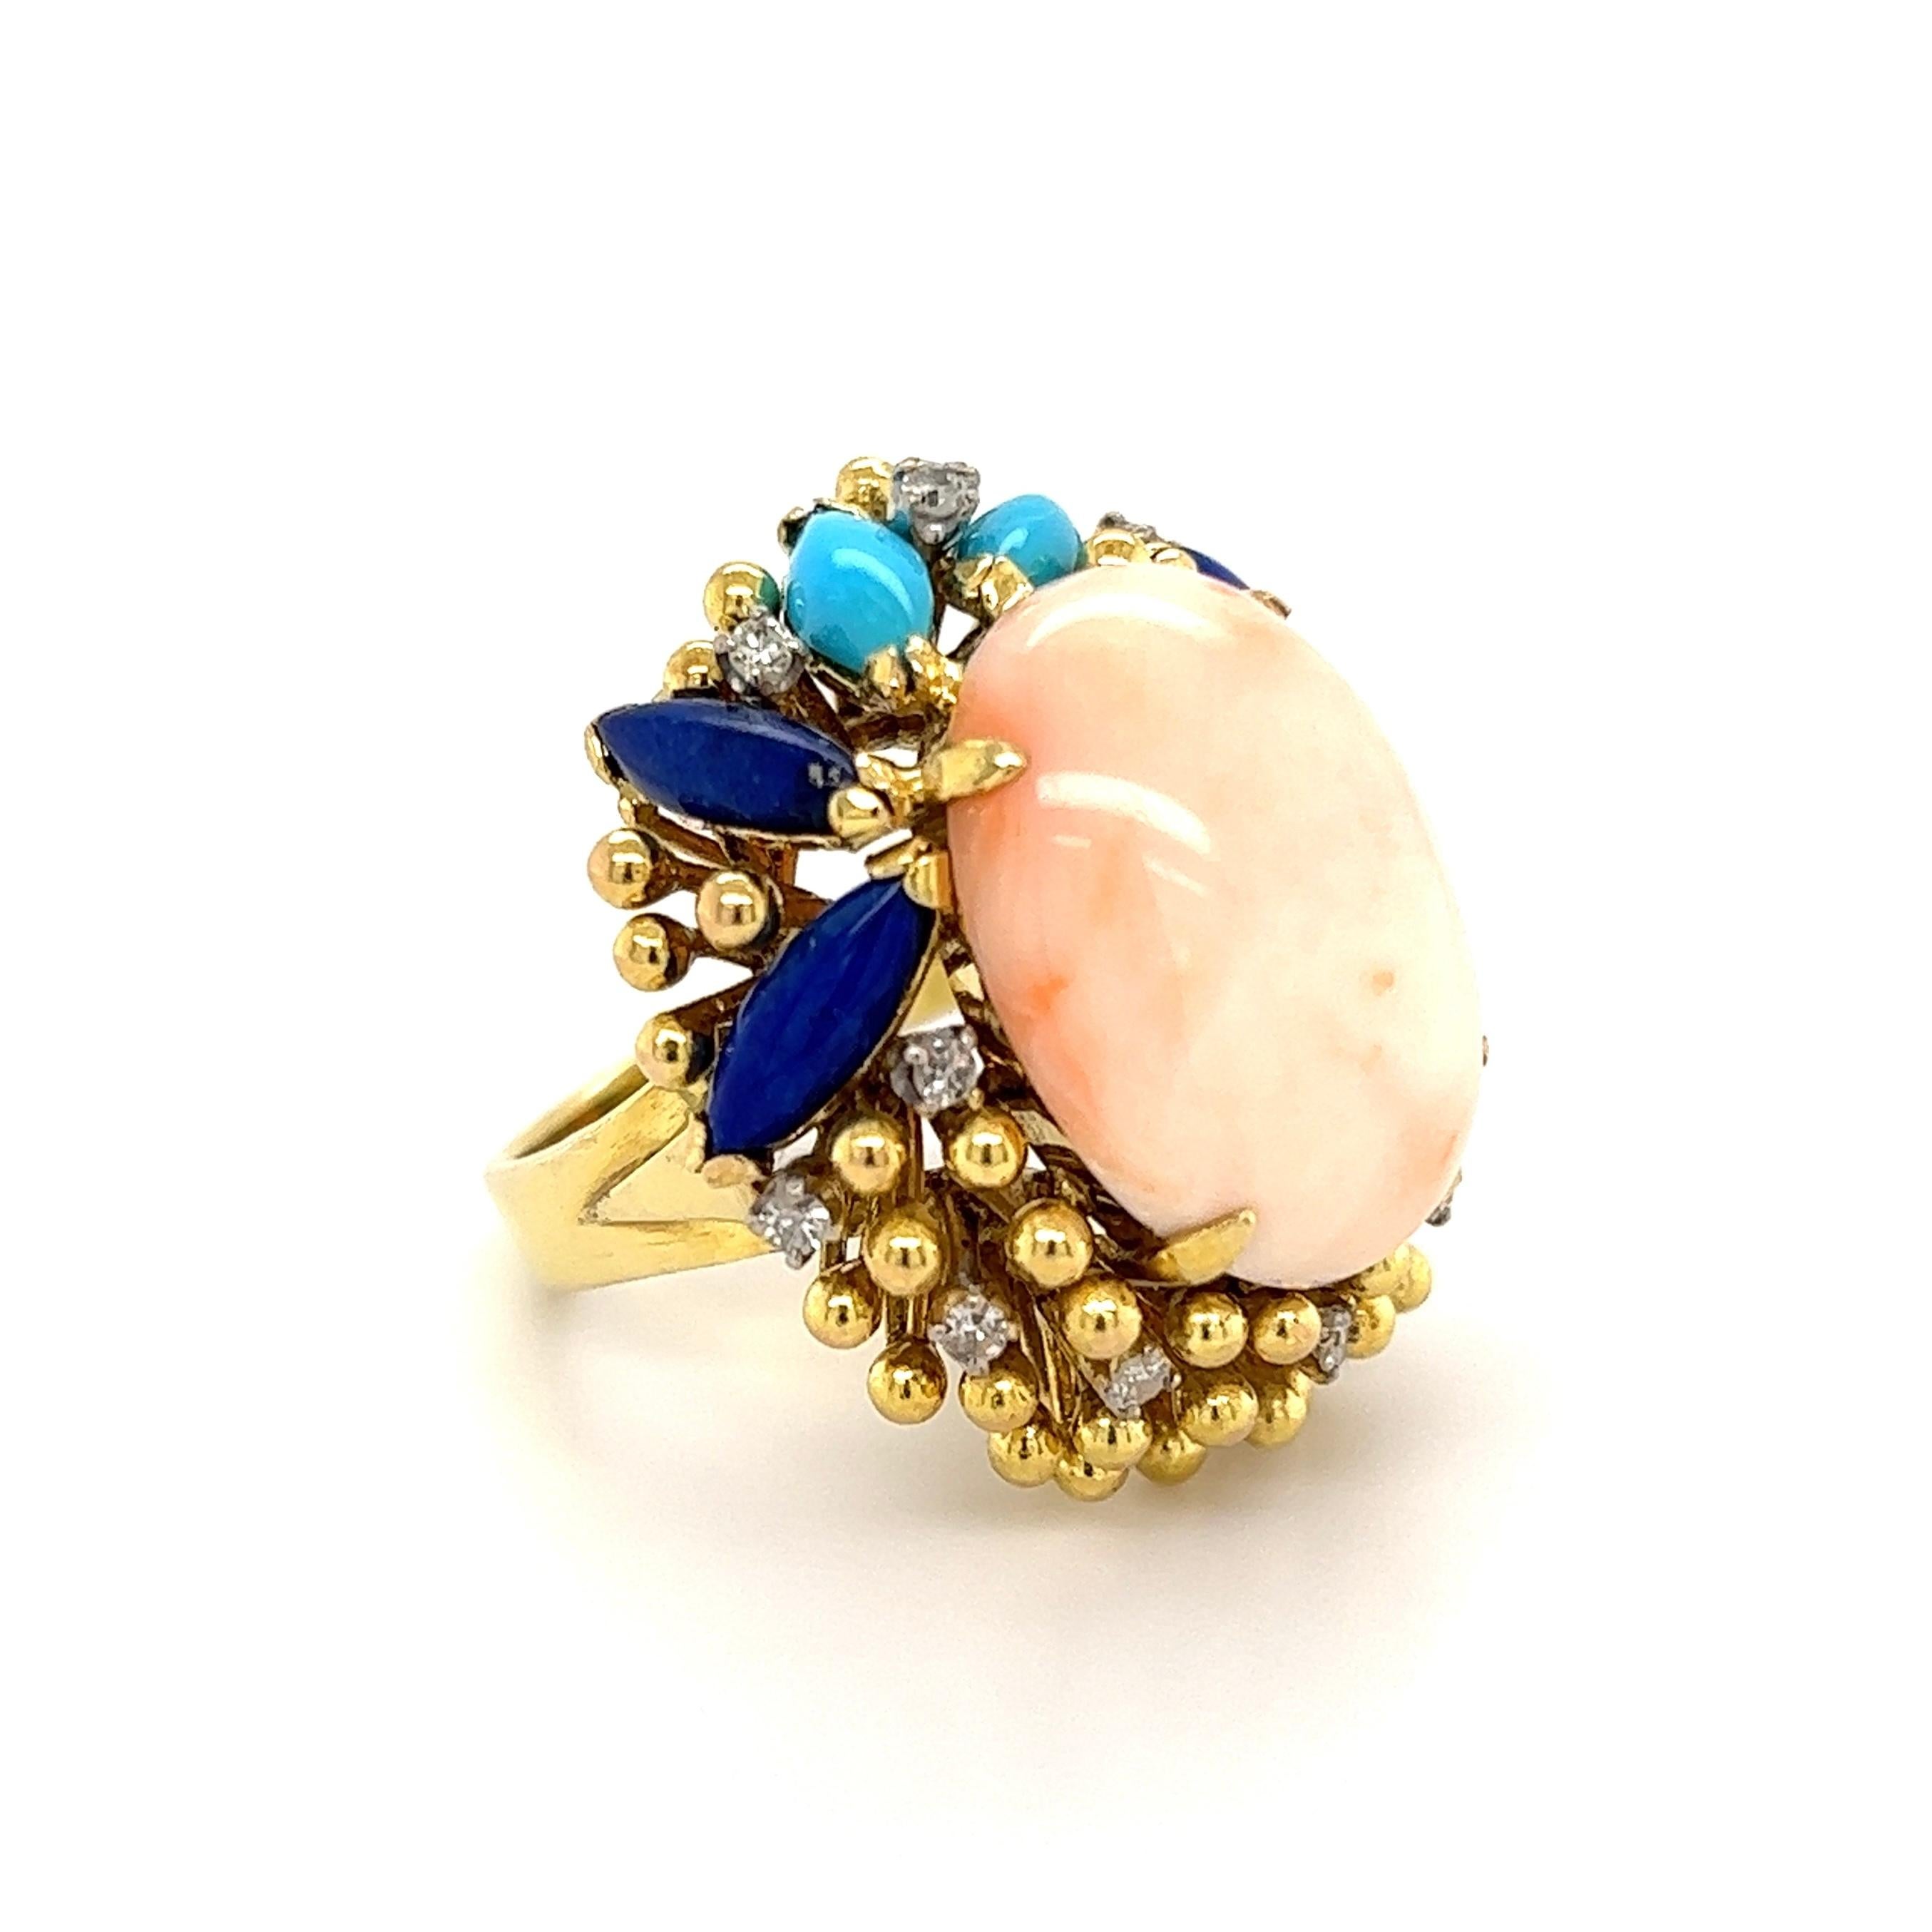 Simply Beautiful!  Finely detailed Angelskin Coral, Lapis Lazuli, Turquoise and Diamond Cocktail Ring. Centering a Hand set 10 Carat Angelskin Coral, surrounded by Lapis, Turquoise and 12 Diamonds, approx. 0.36tcw. Hand crafted 14K Yellow Gold